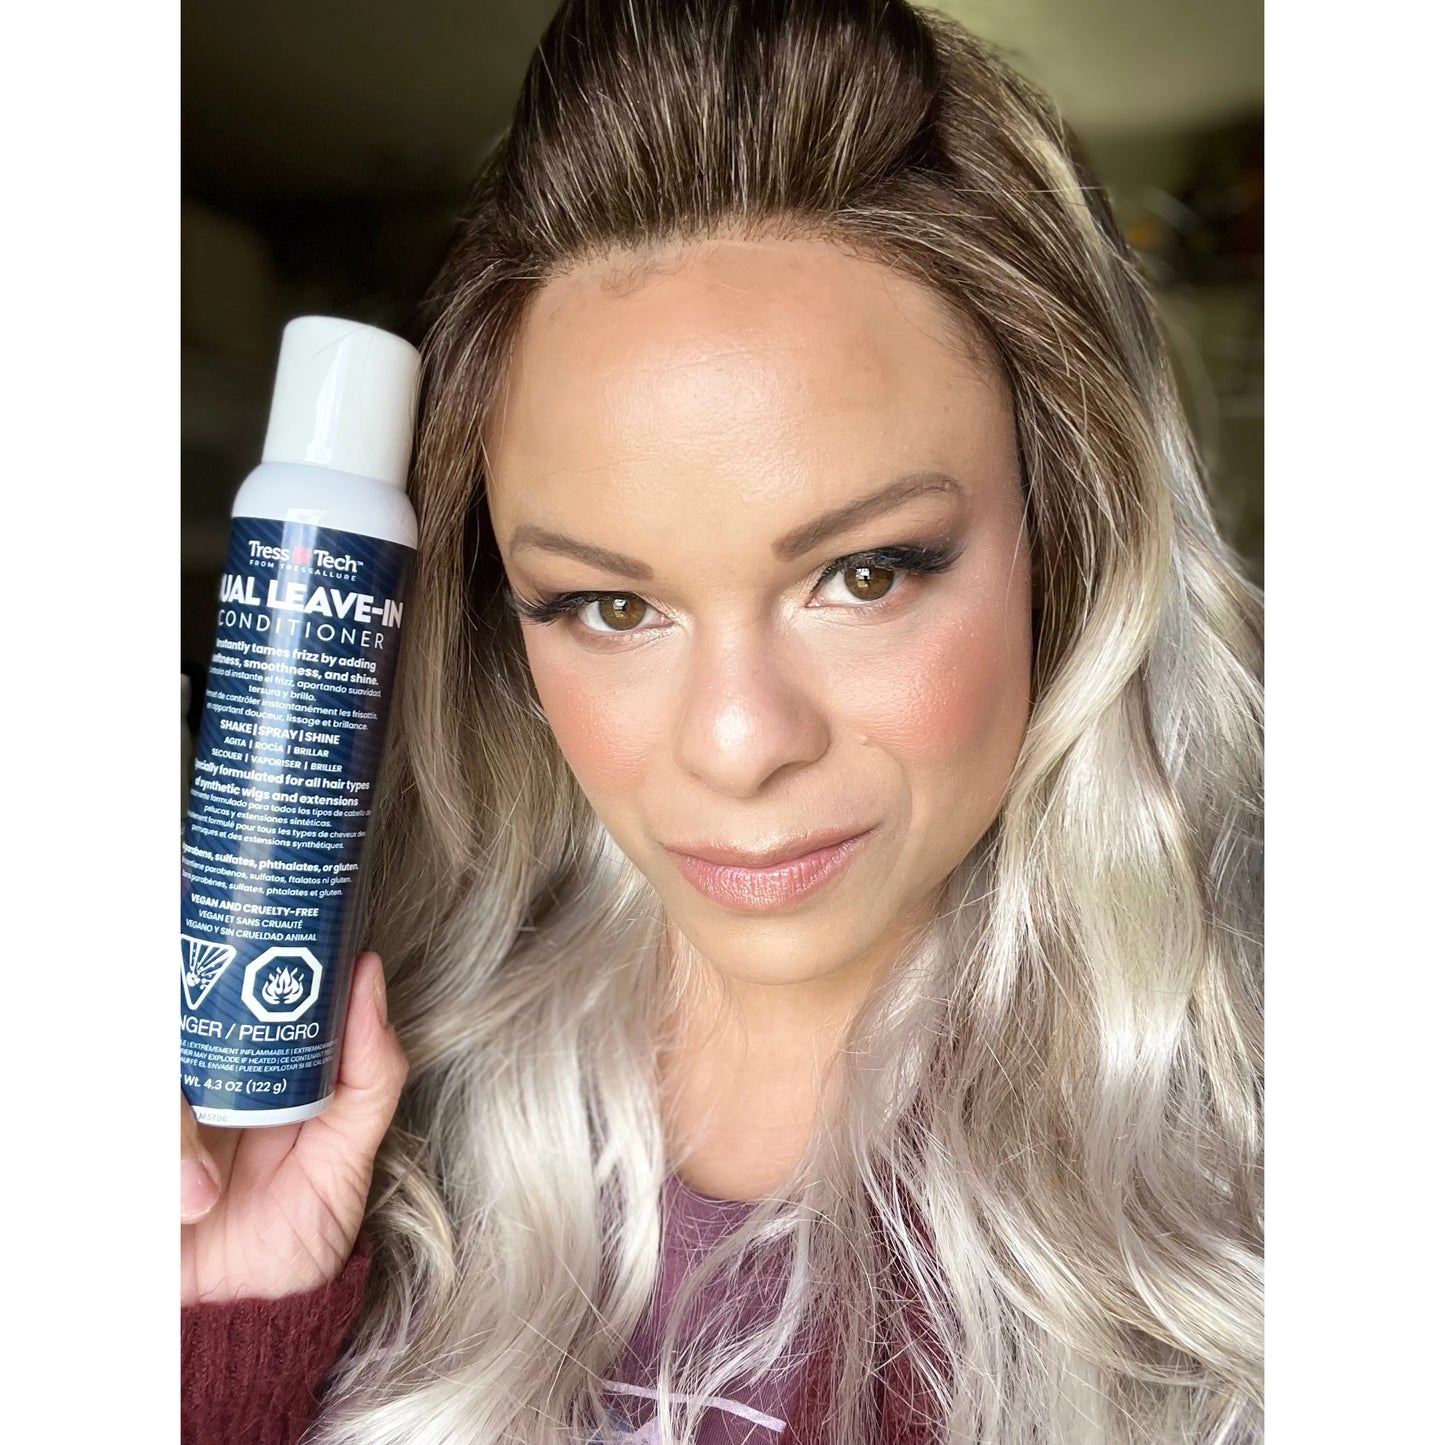 NEW TressTech Dual Leave-in Conditioner by Tressallure